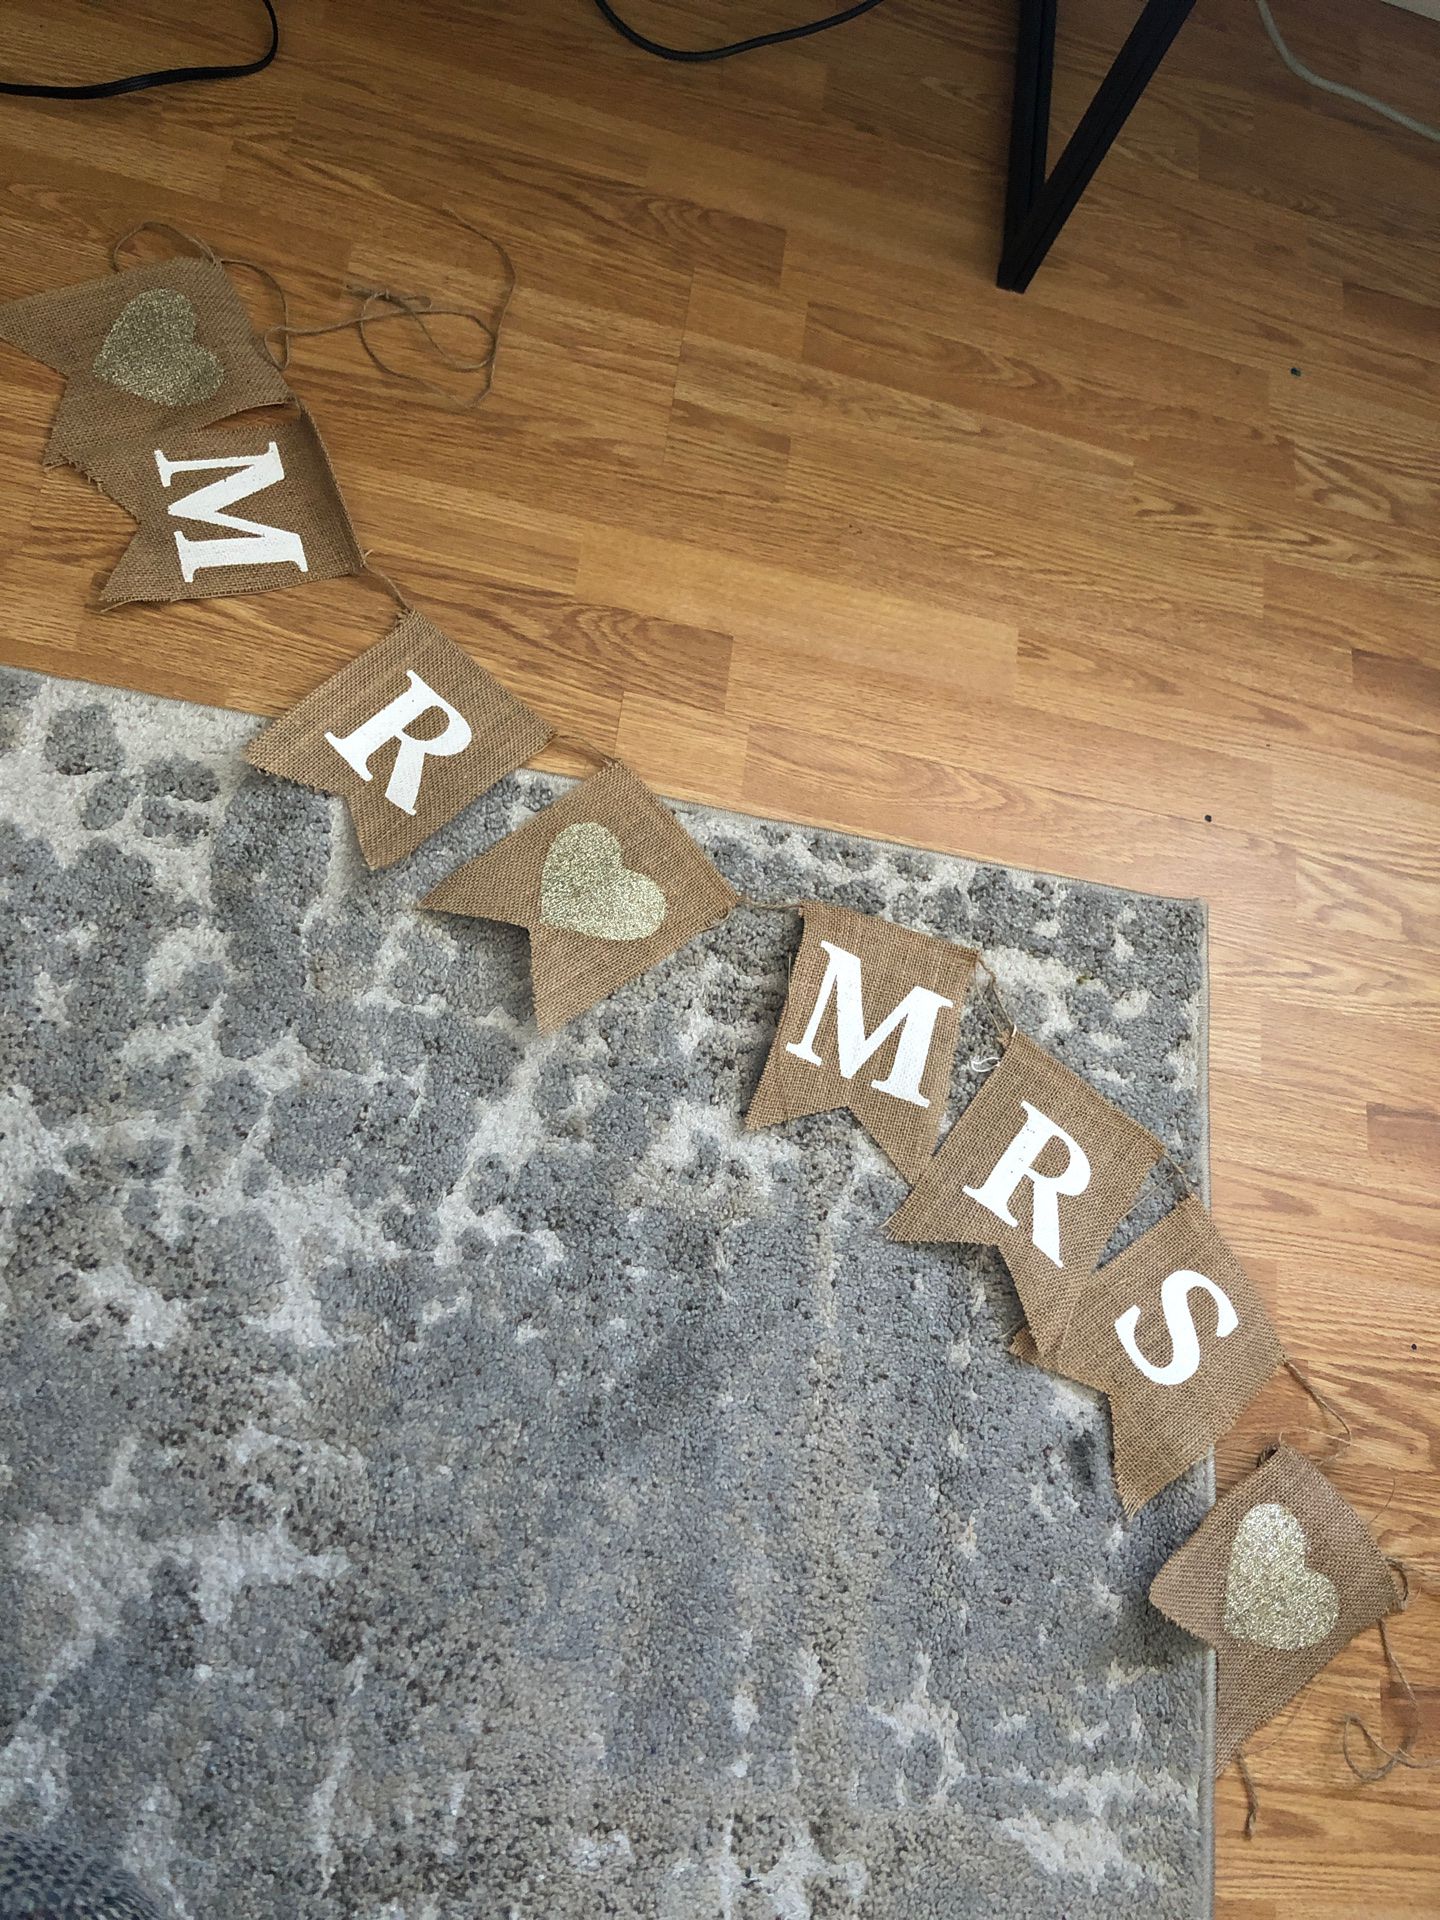 Mr. and Mrs. banner $5